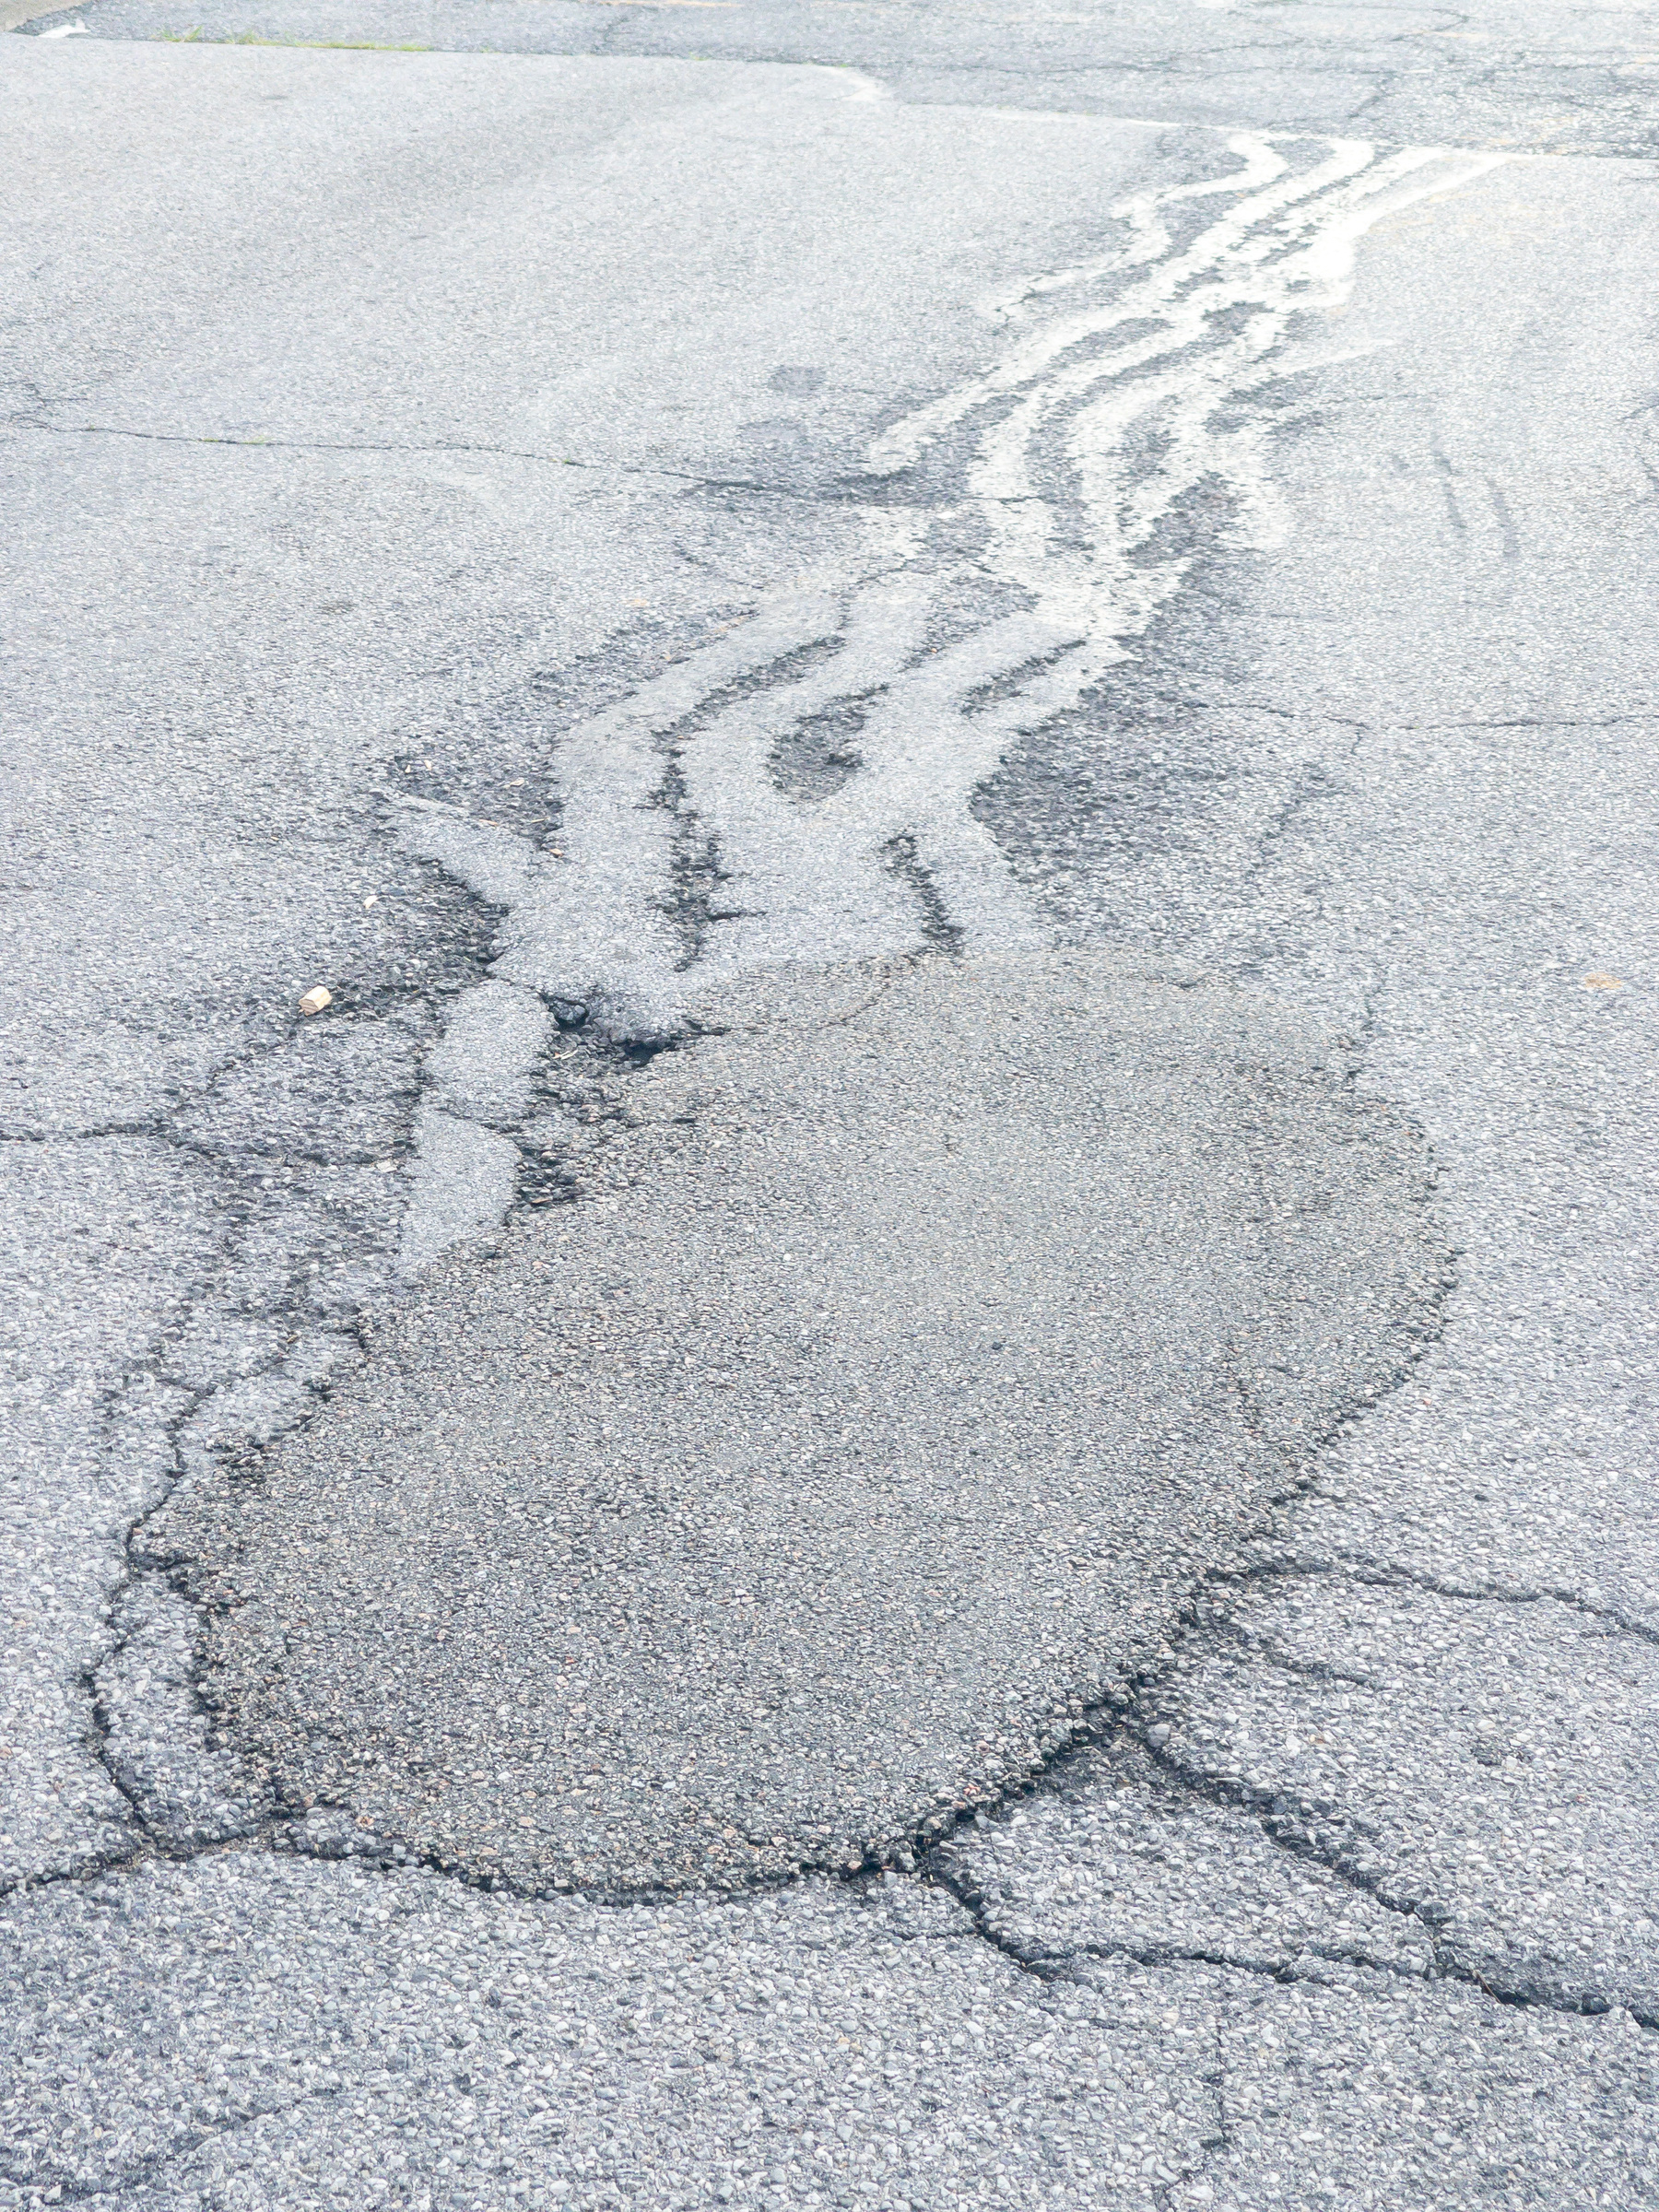 Large oval patch and curly crack patches in an asphalt road surface.